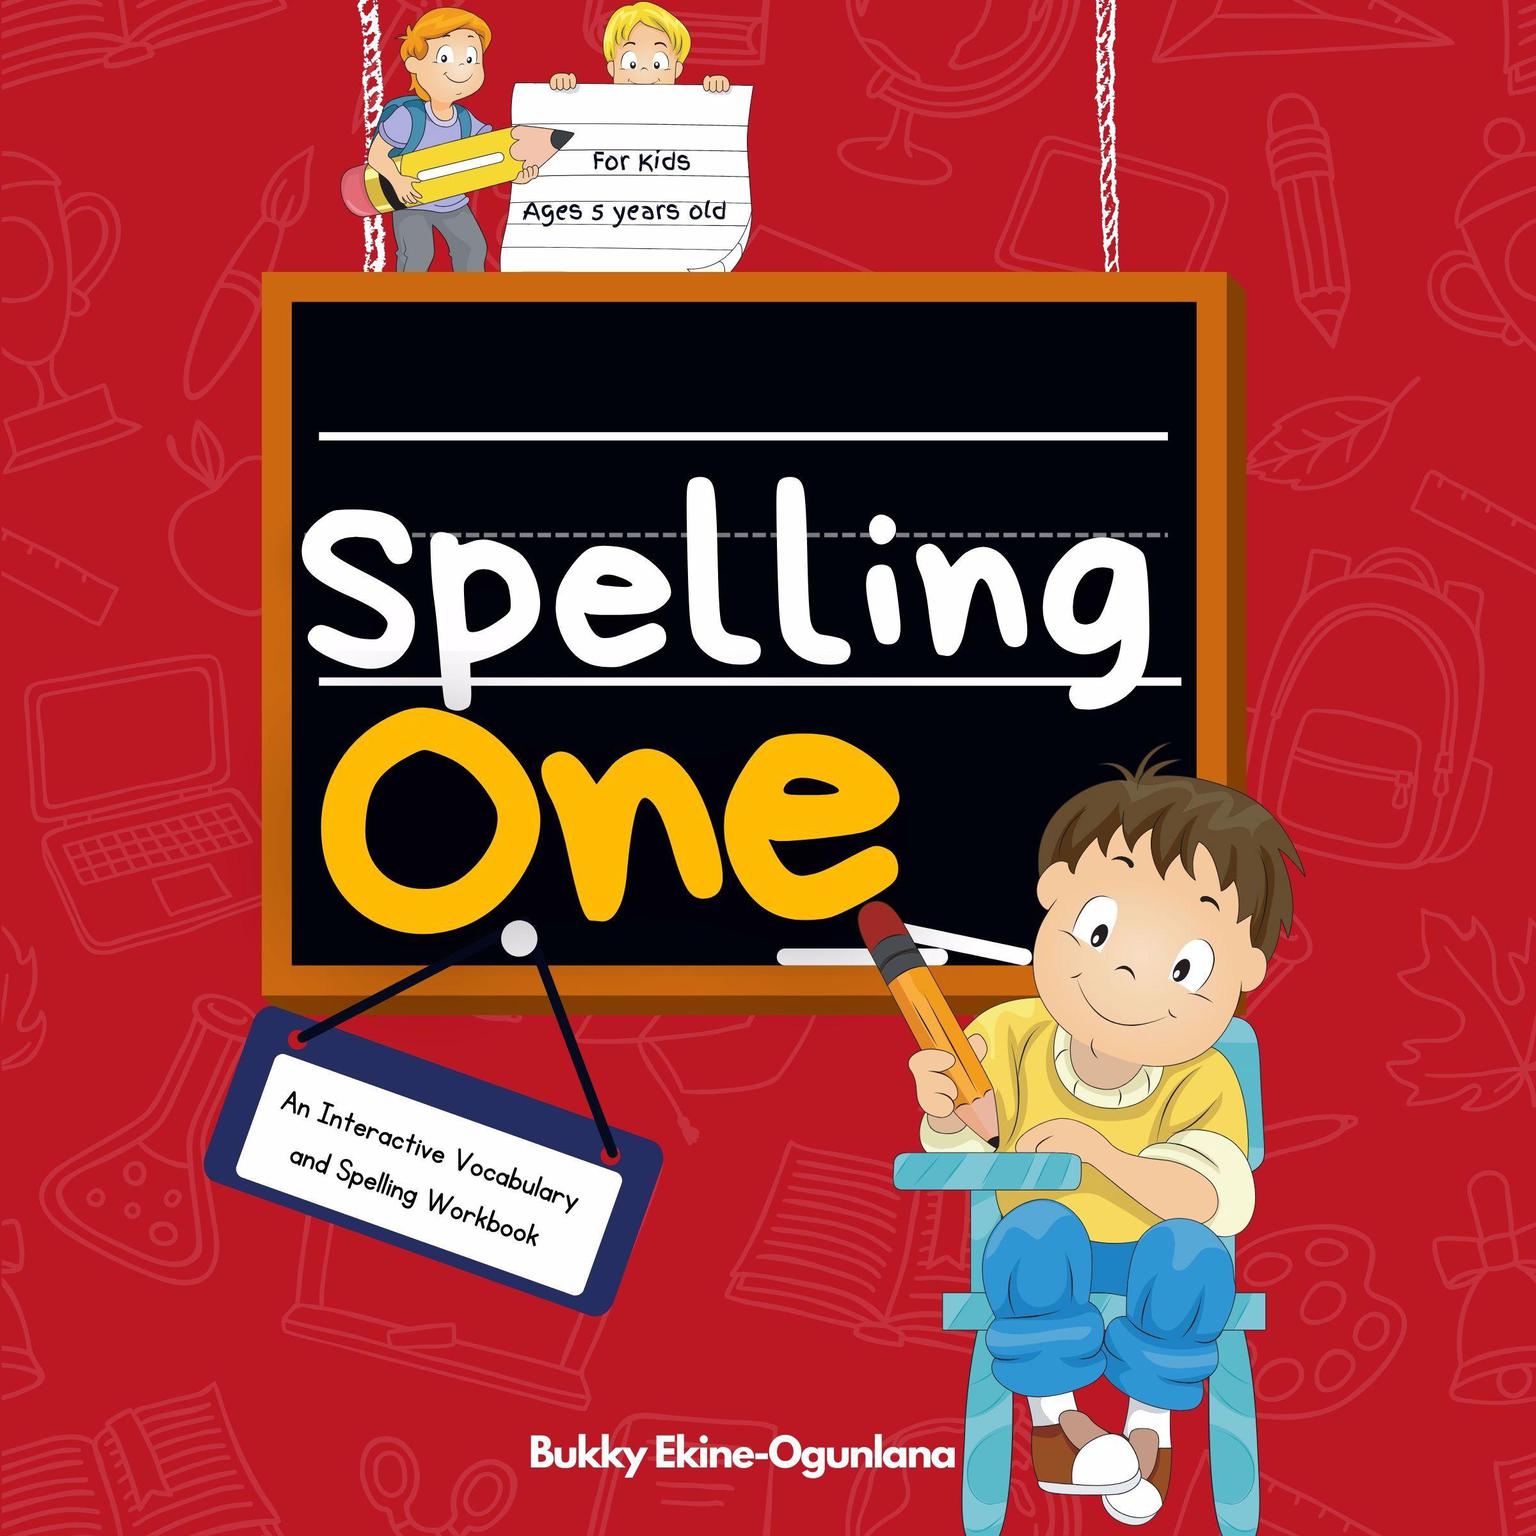 Spelling One (Abridged): Spelling One: An Interactive Vocabulary and Spelling Workbook for 5-Year-Olds (With Audiobook Lessons) Audiobook, by Bukky Ekine-Ogunlana